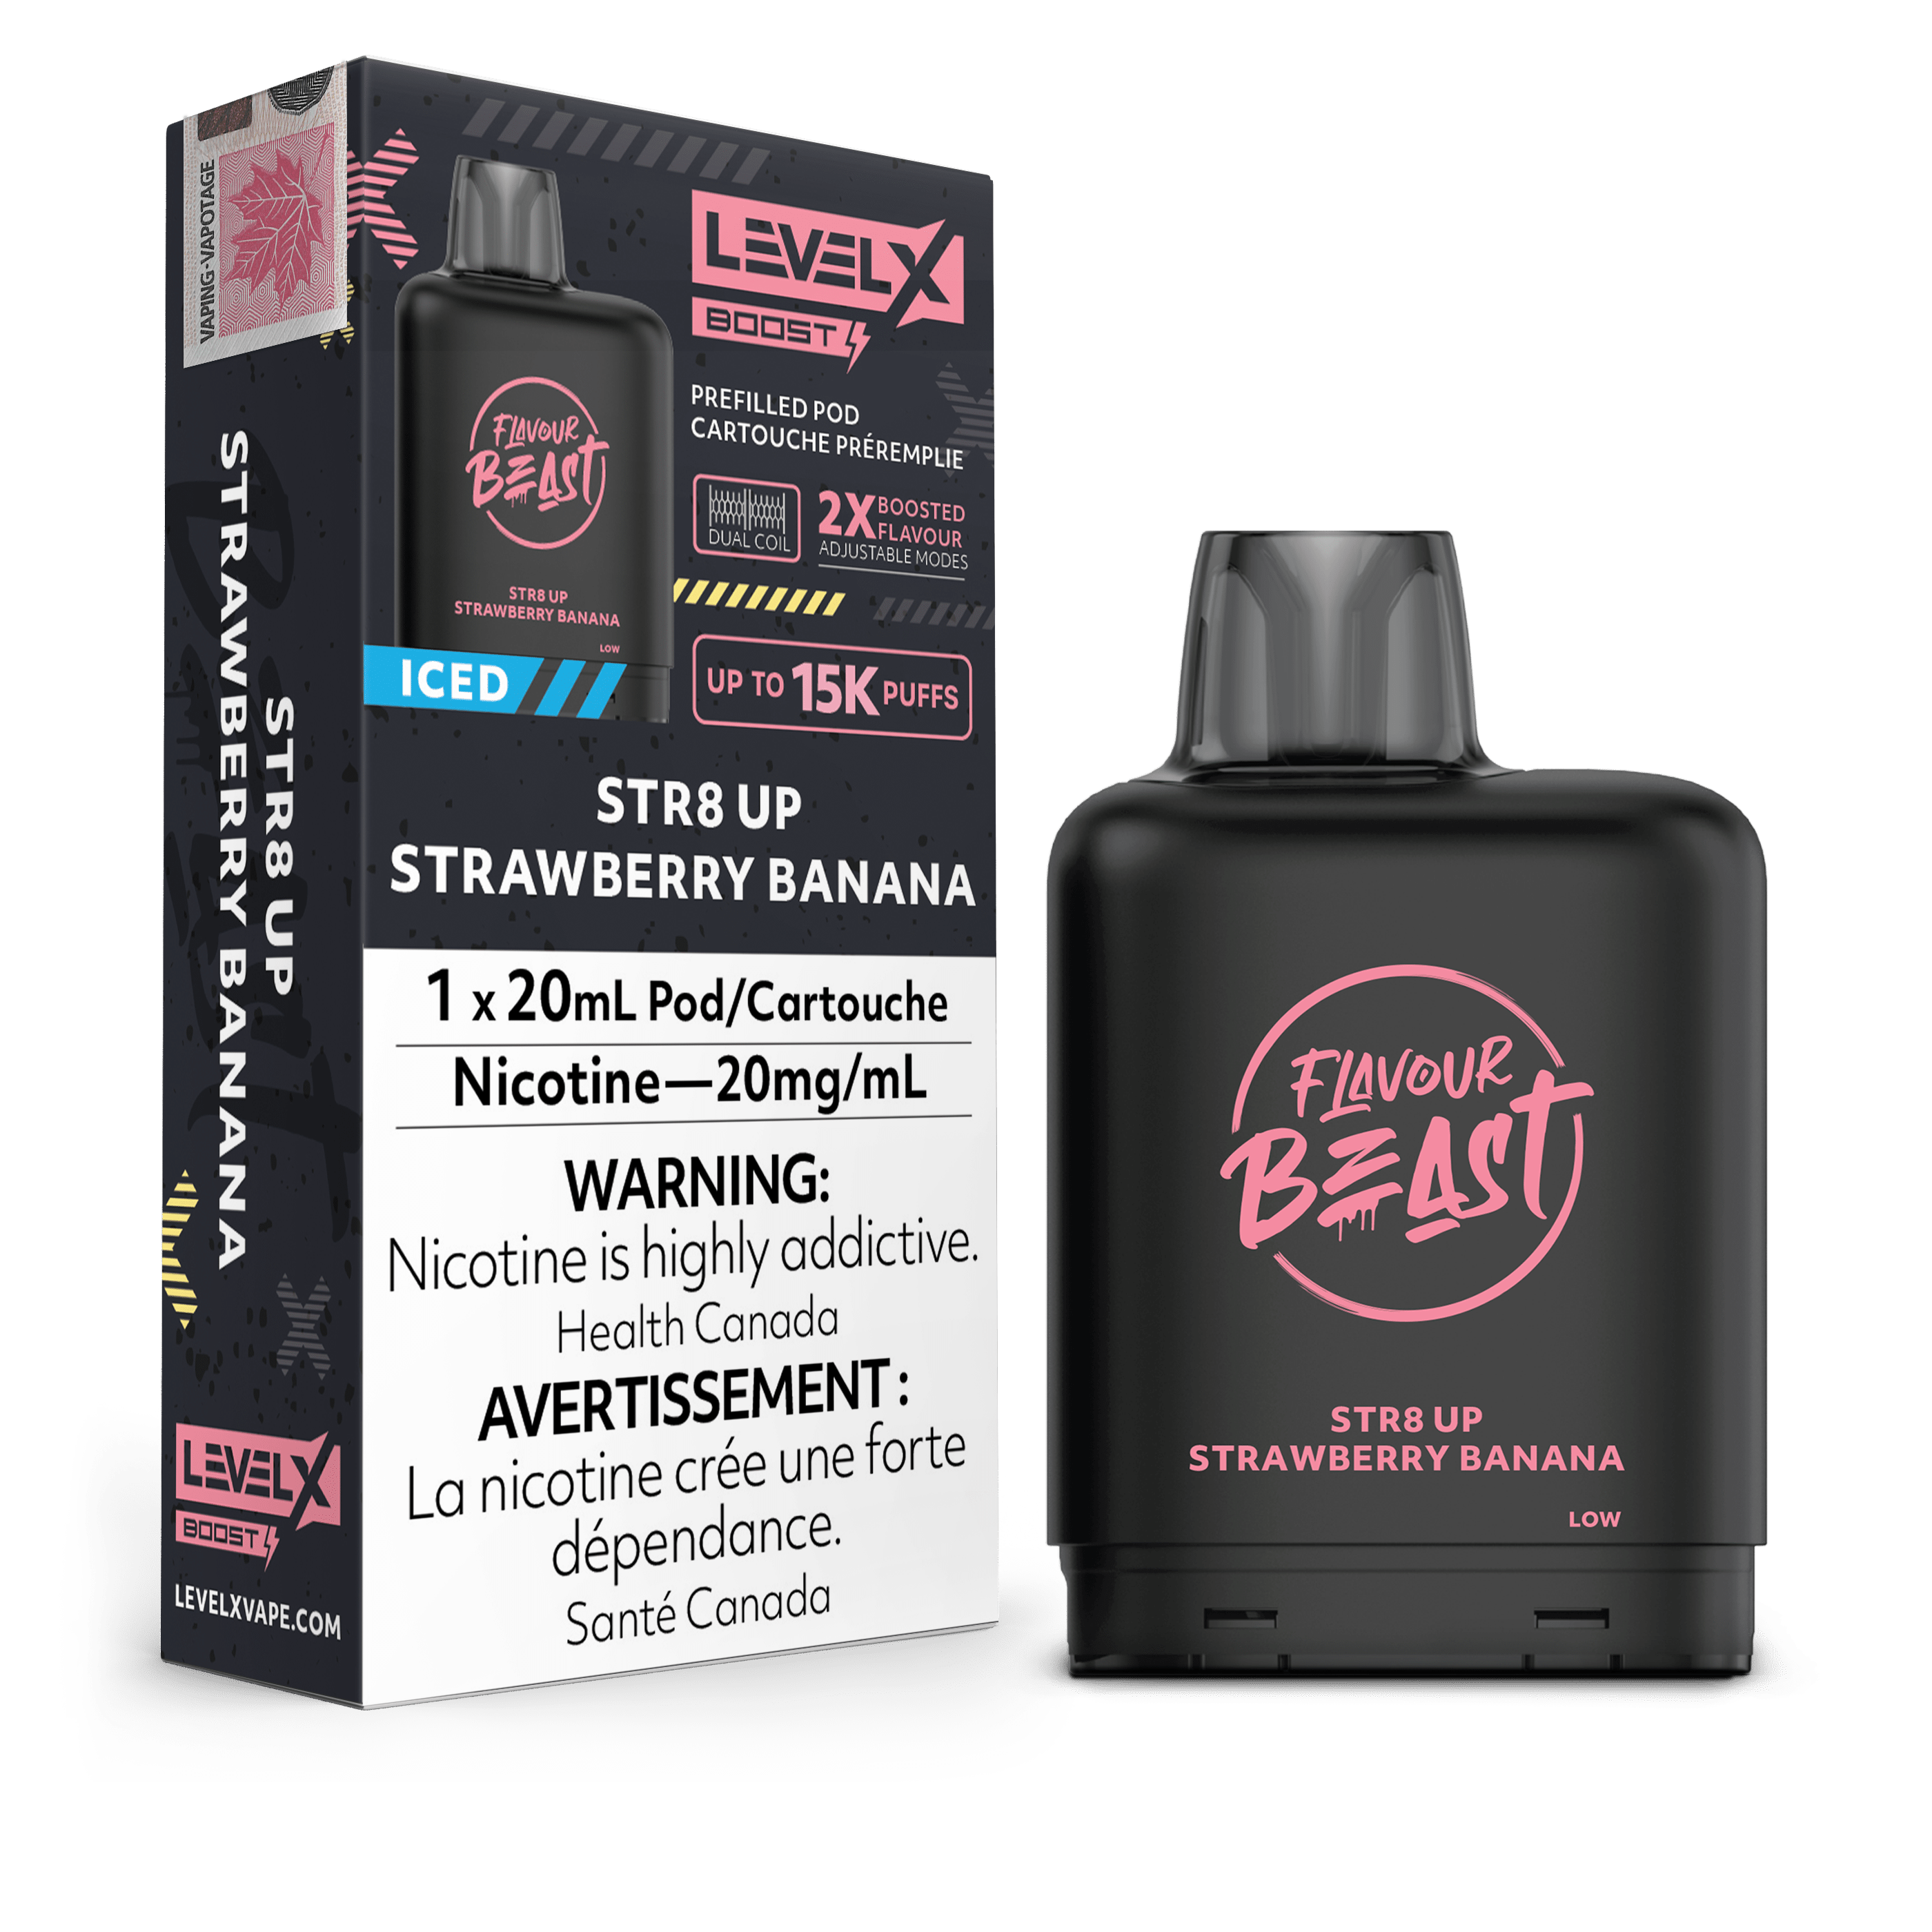 Level X Flavour Beast Boost Pod - STR8 Up Strawberry Banana Iced available on Canada online vape shop